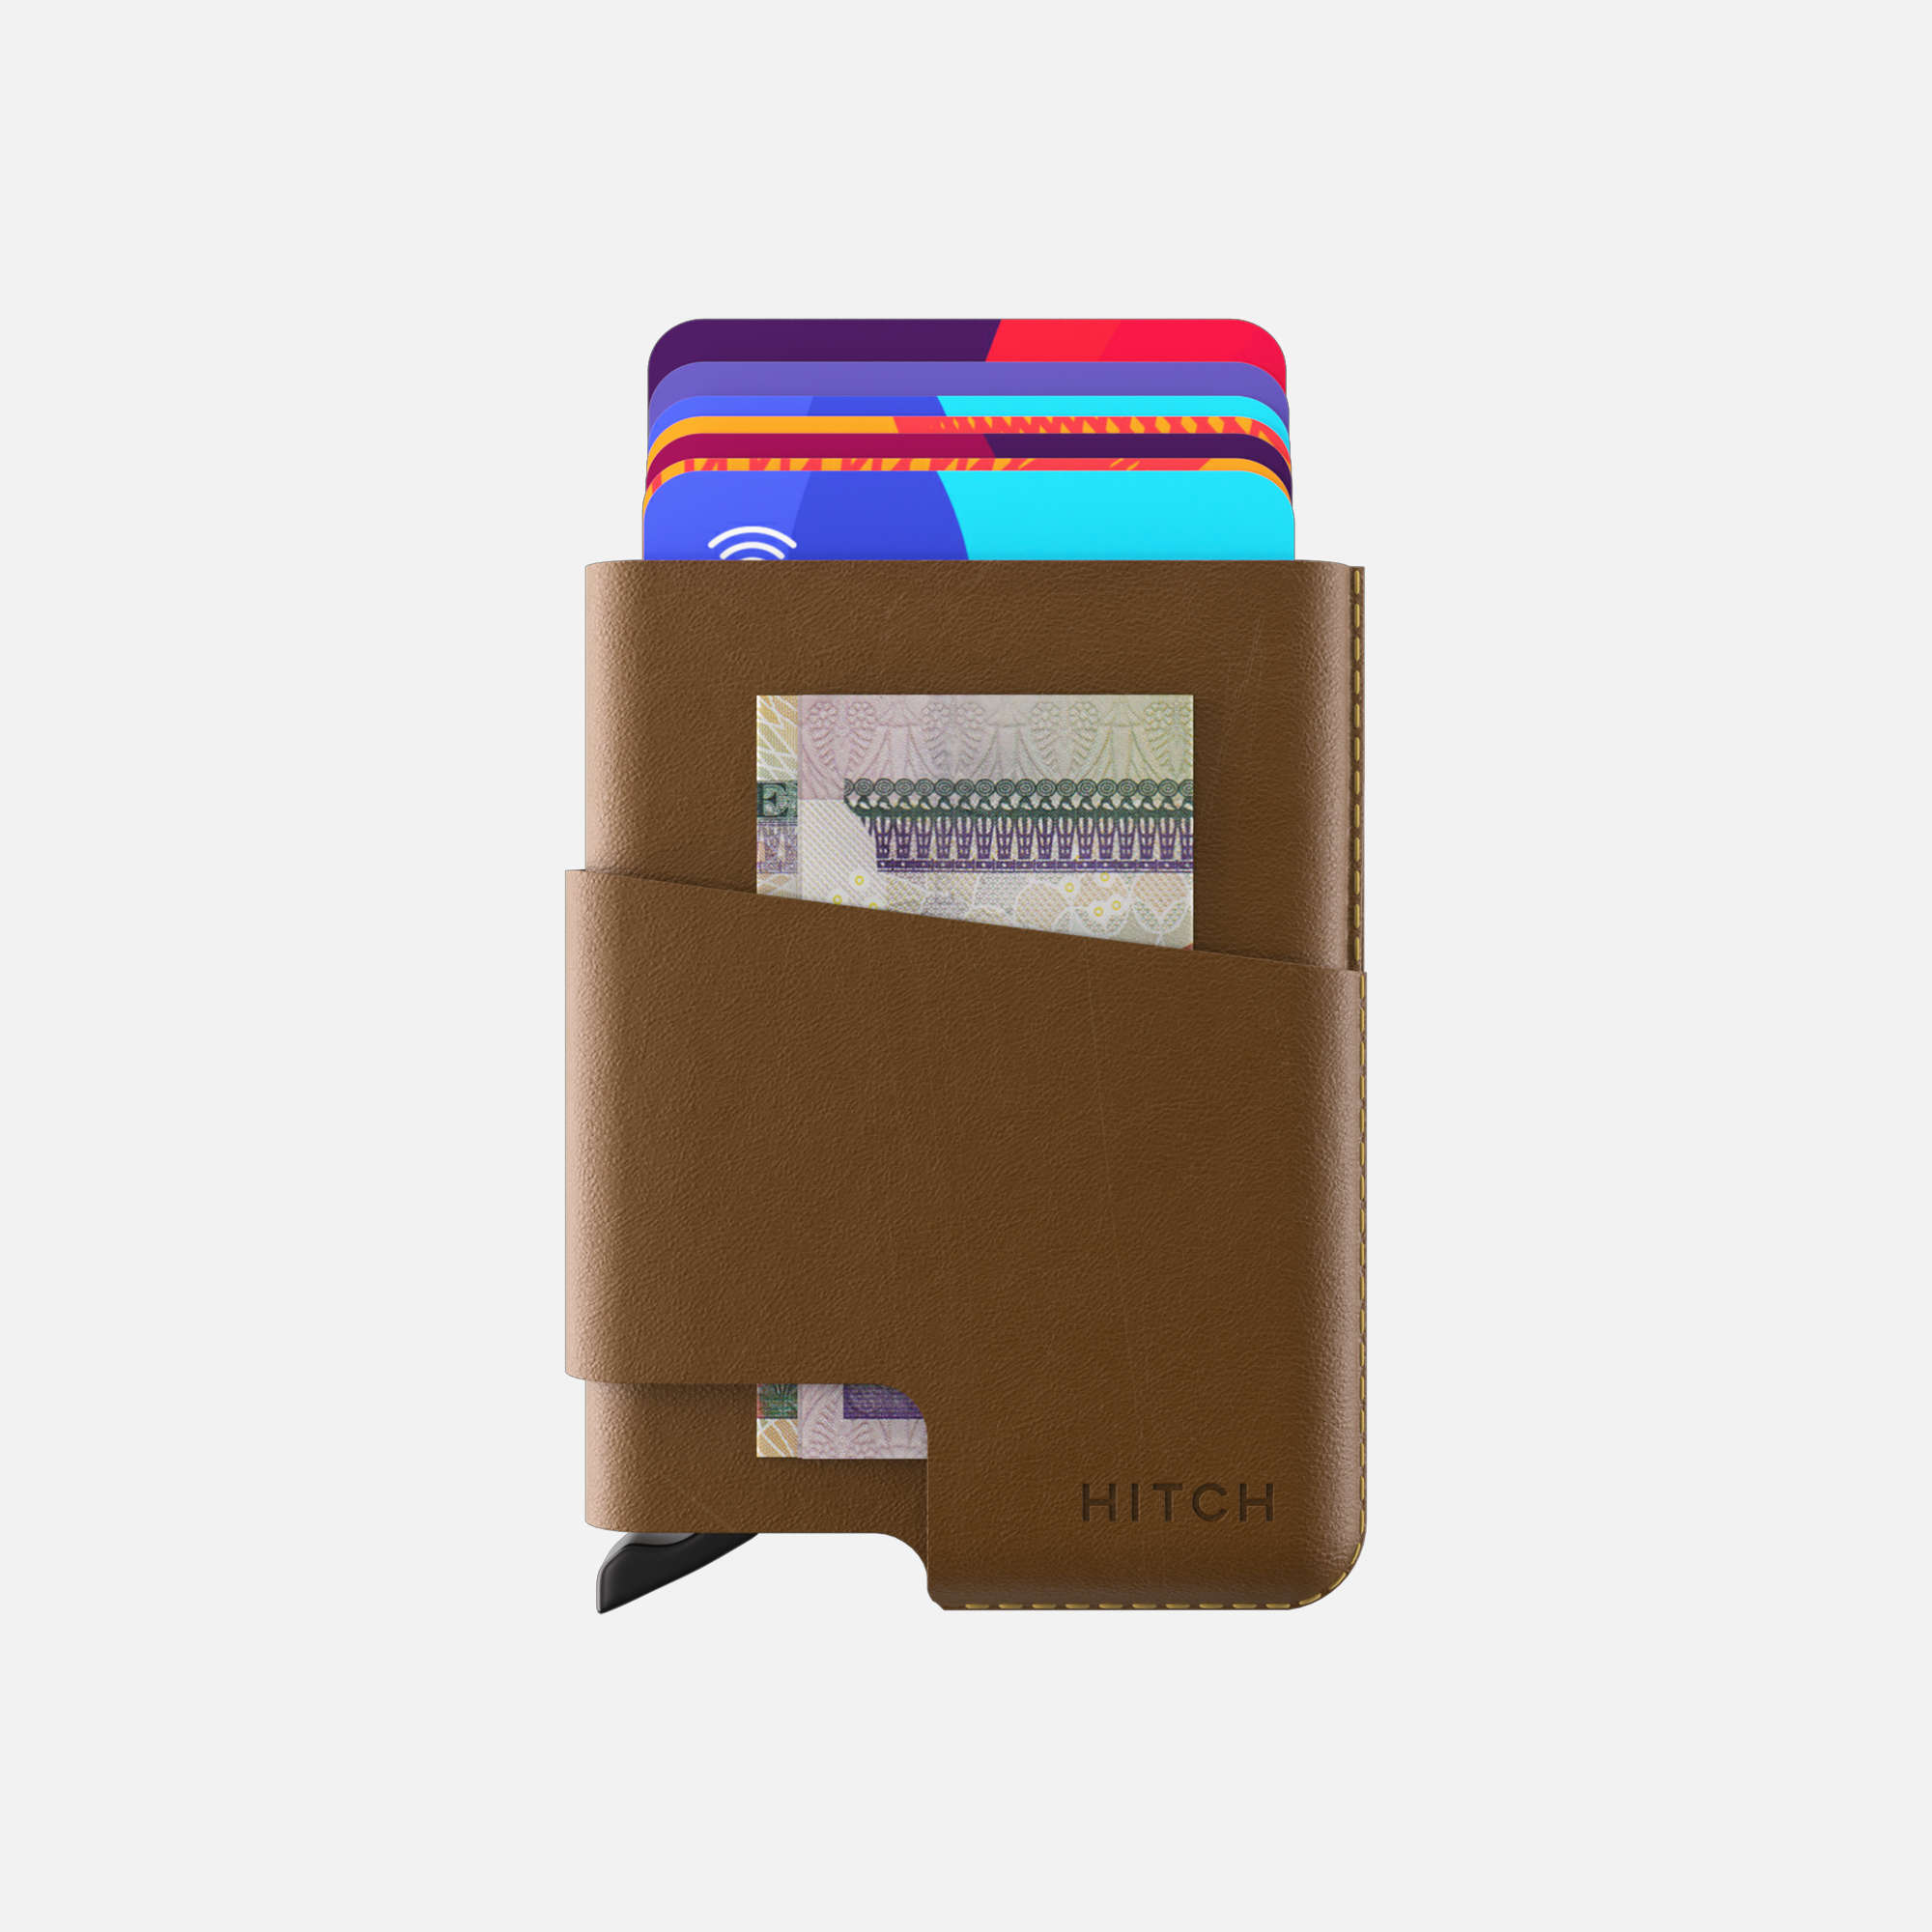 Brown leather cardholder wallet with colorful credit cards and cash visible for finance and shopping concepts."